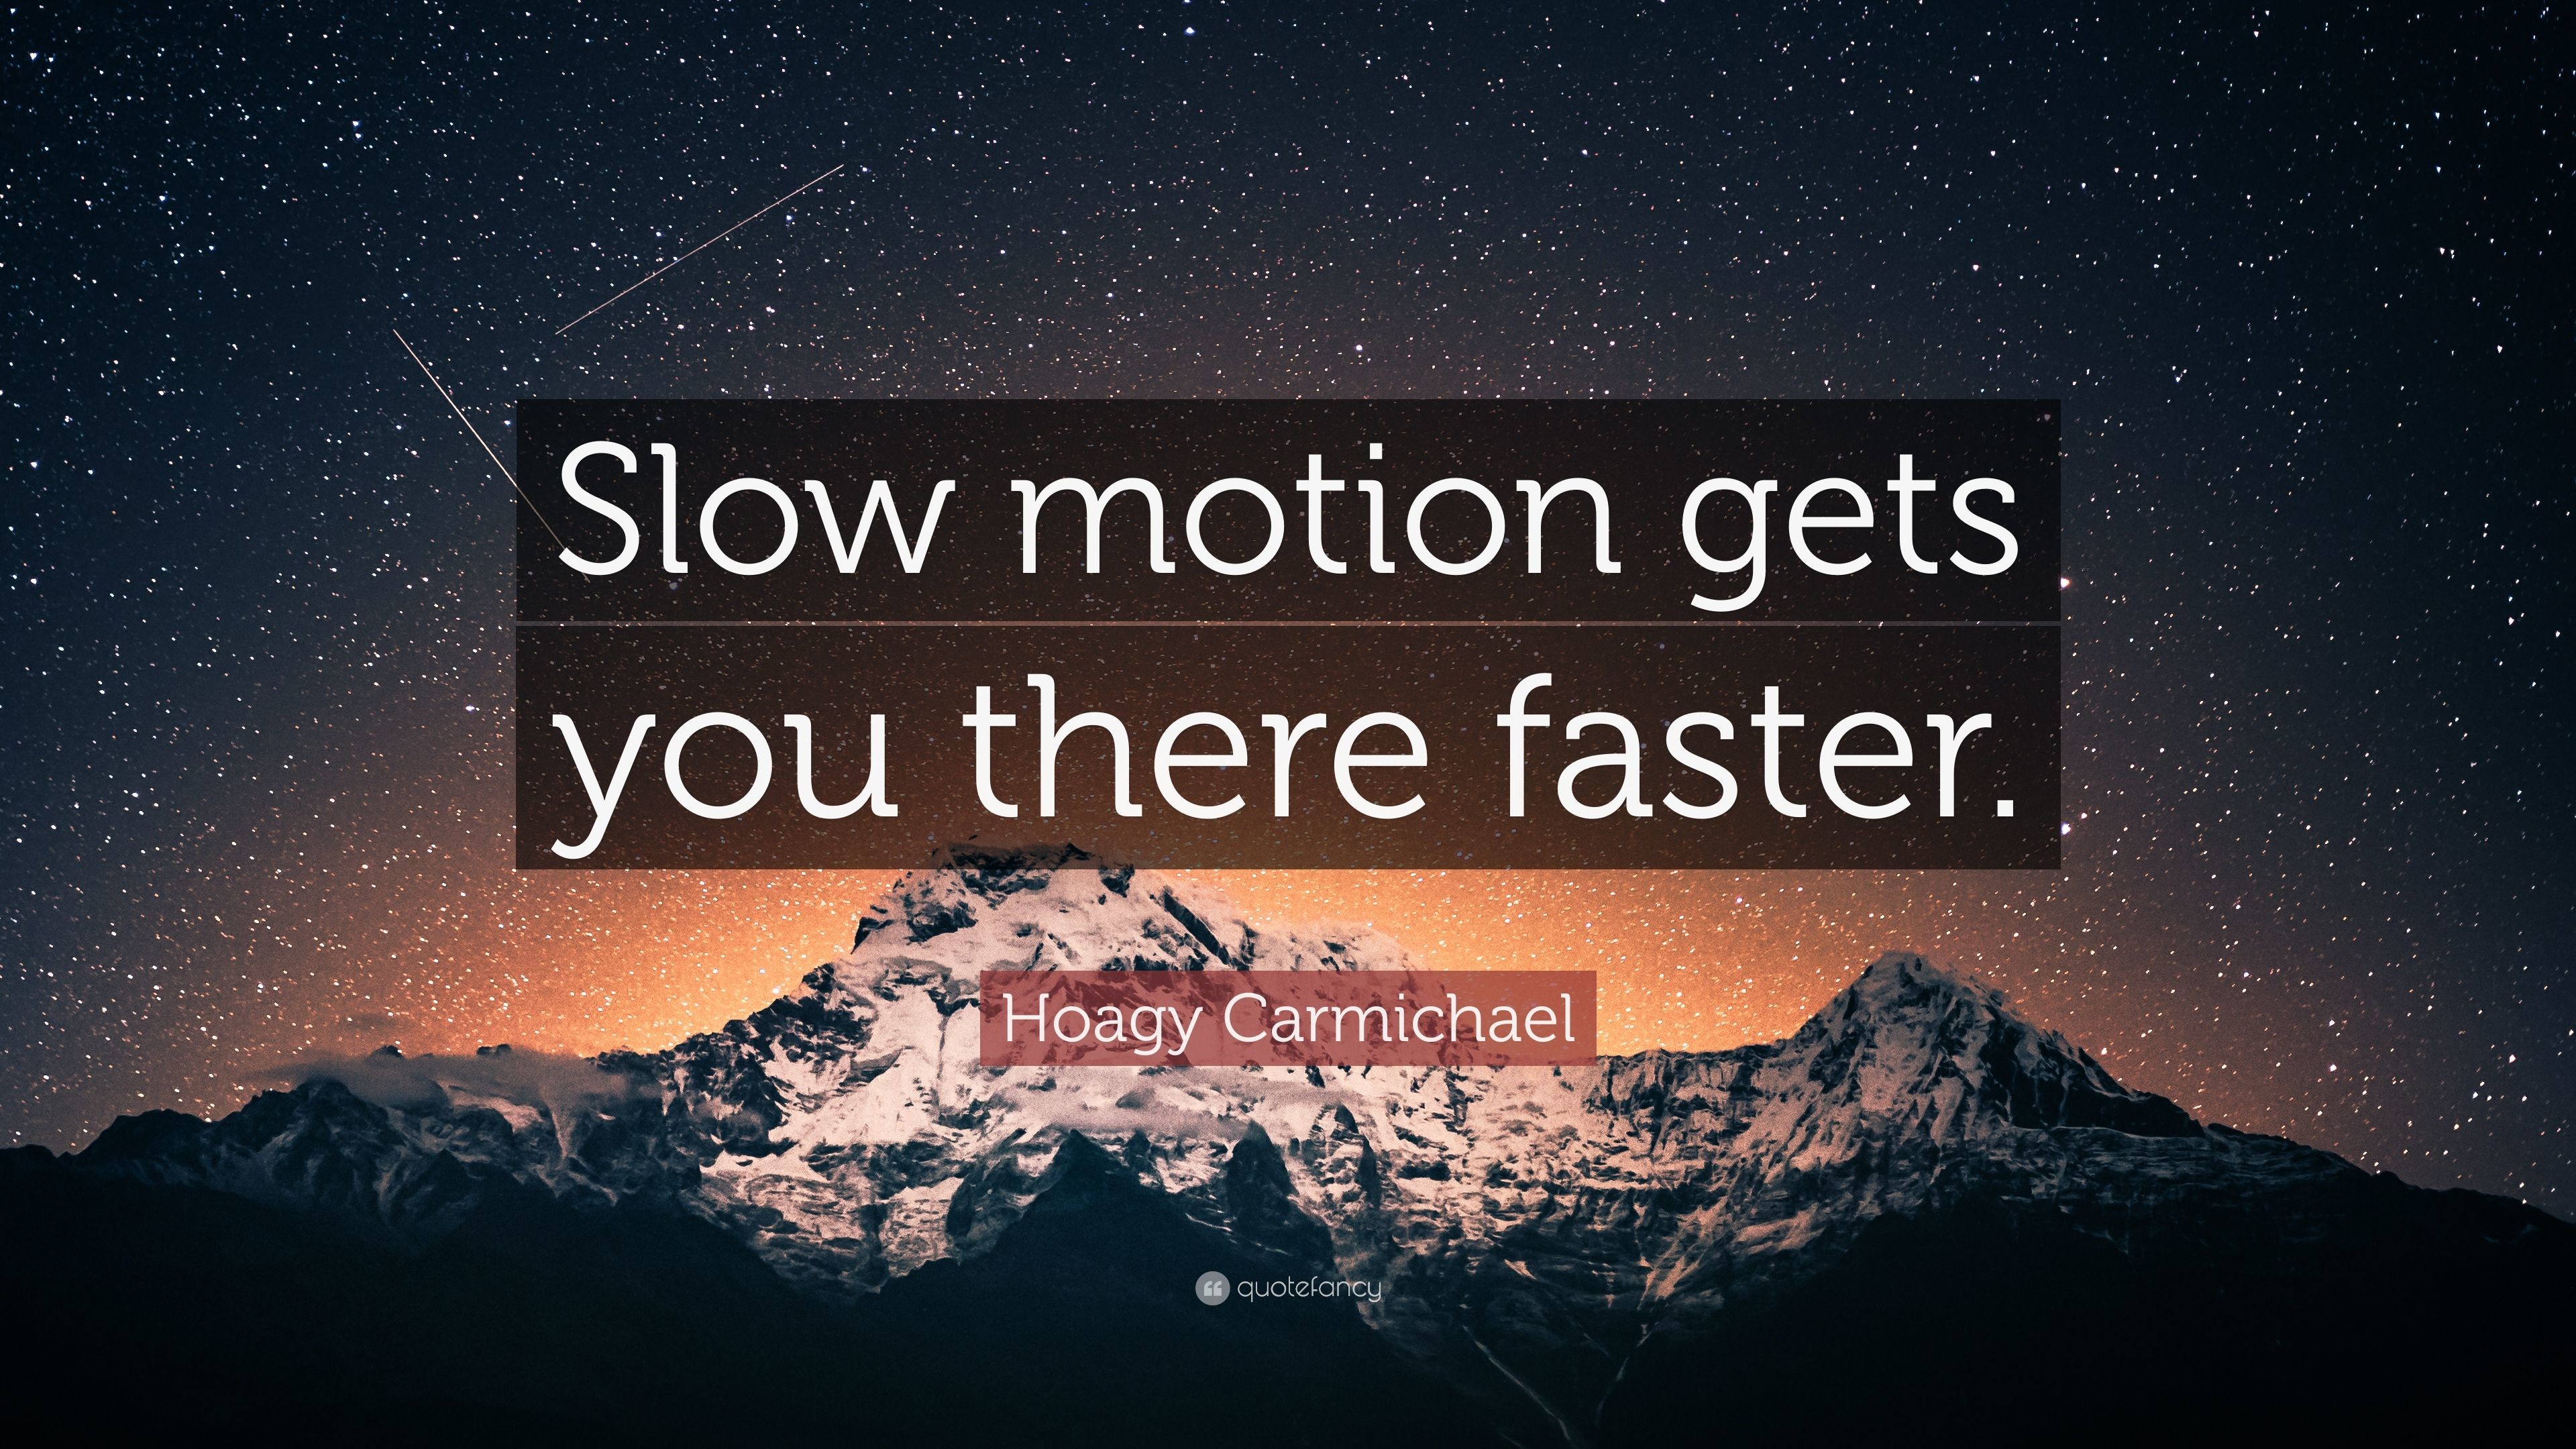 3840x2160 Hoagy Carmichael Quote: “Slow motion gets you there faster.”